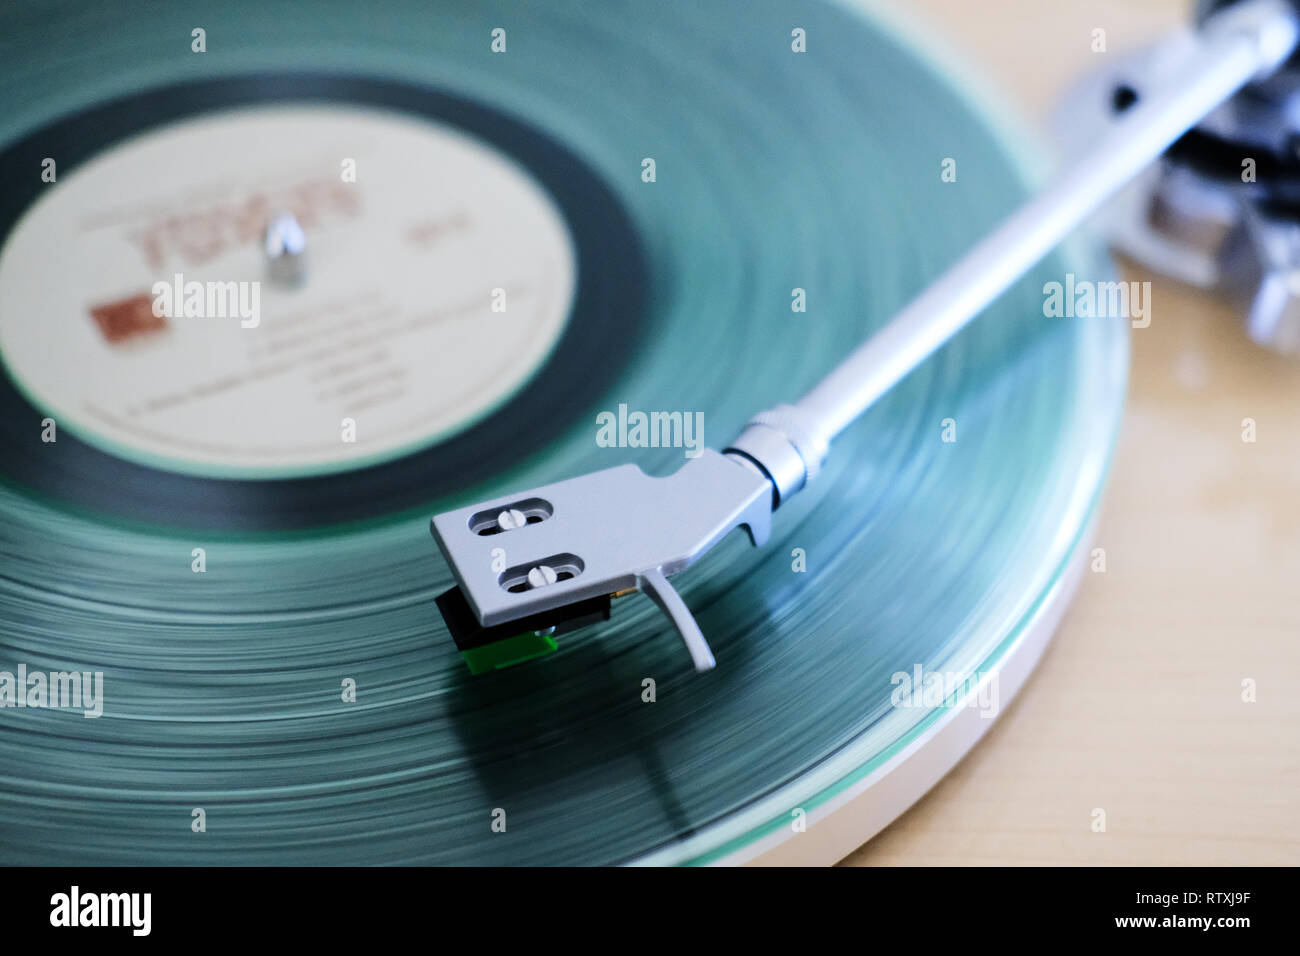 A clear vinyl long playing record on a turntable with a needle arm on the record track playing Stock Photo